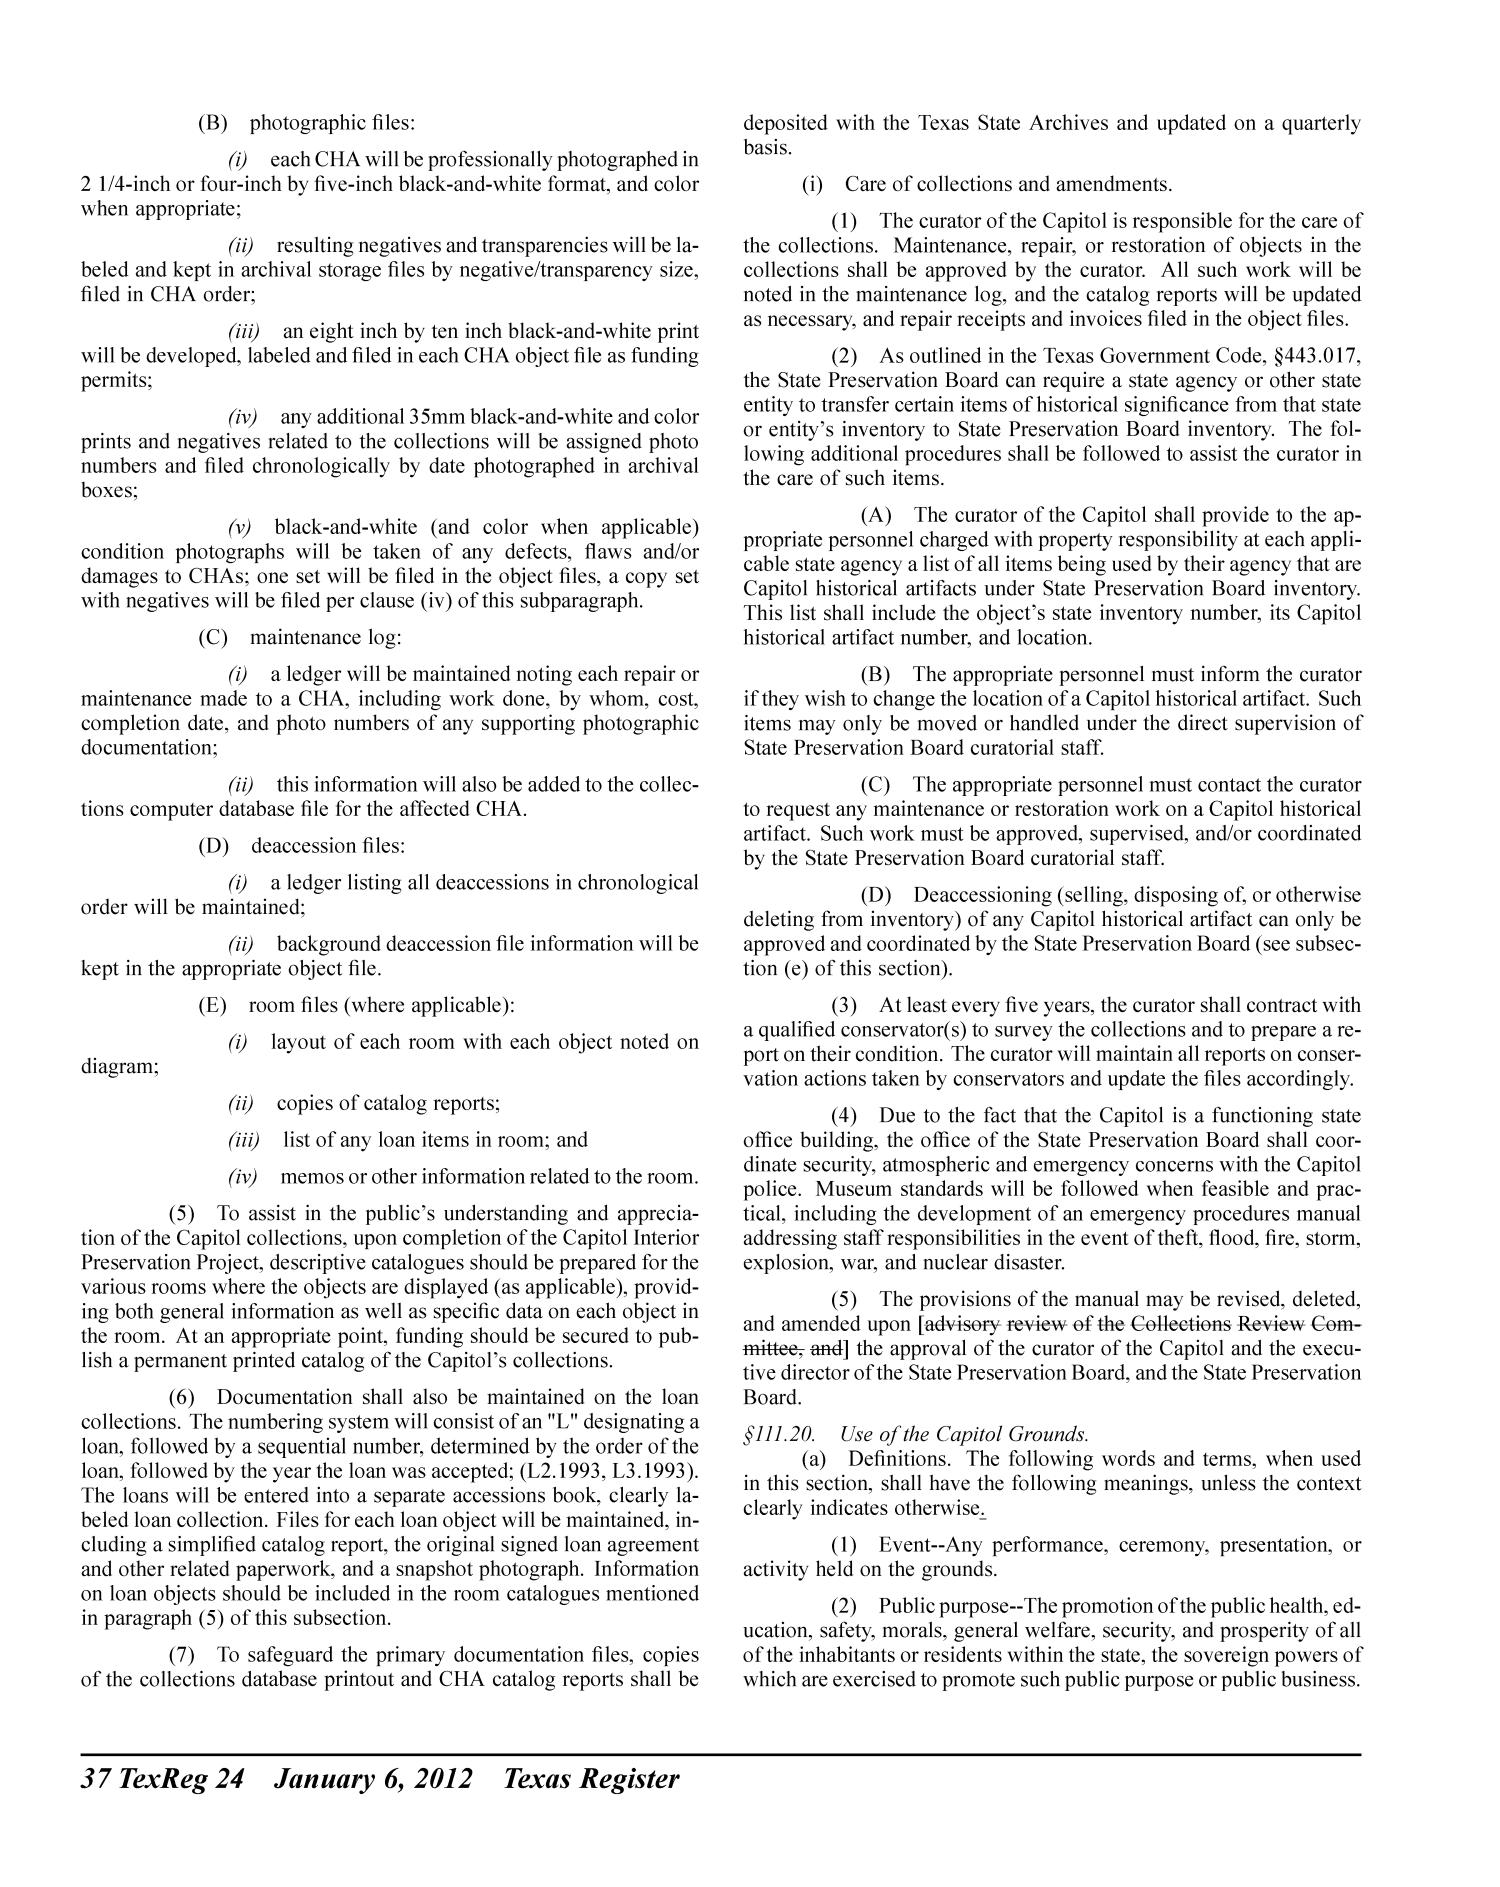 Texas Register, Volume 37, Number 1, Pages 1-84, January 6, 2012
                                                
                                                    24
                                                